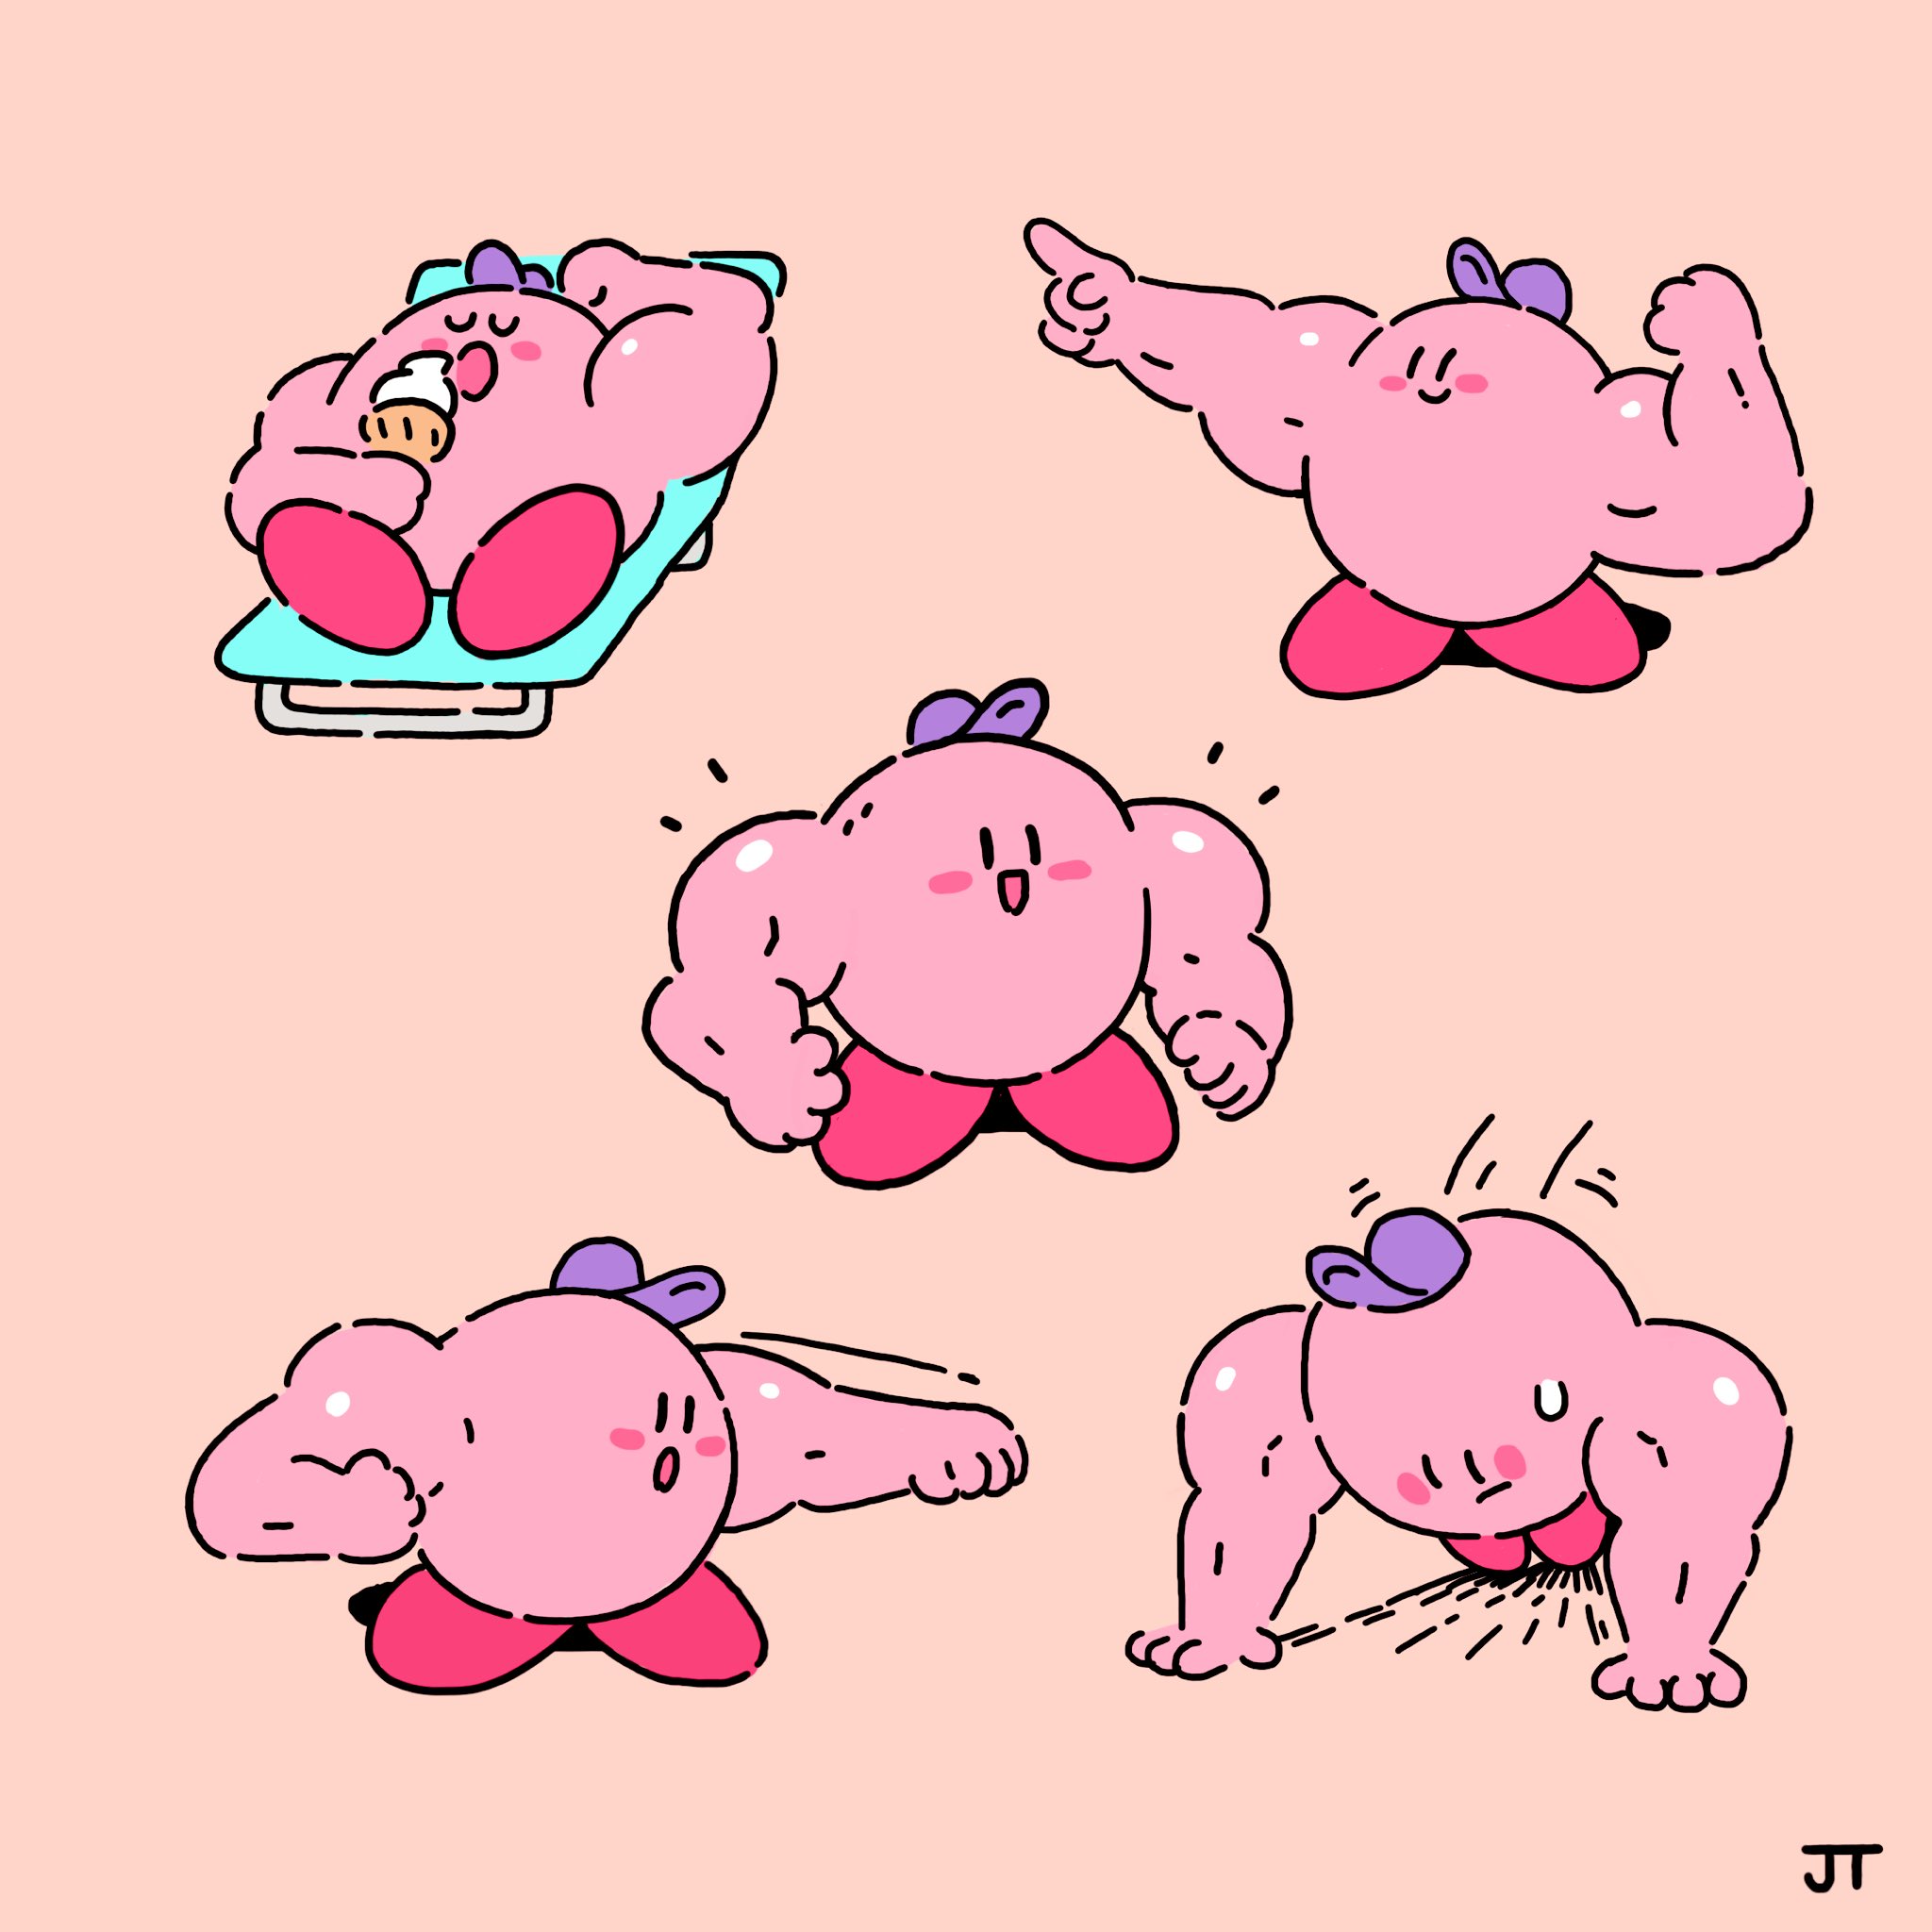 James Turner on Twitter: "Kirby has been working out  https://t.co/hAyVGSTMYD" / Twitter